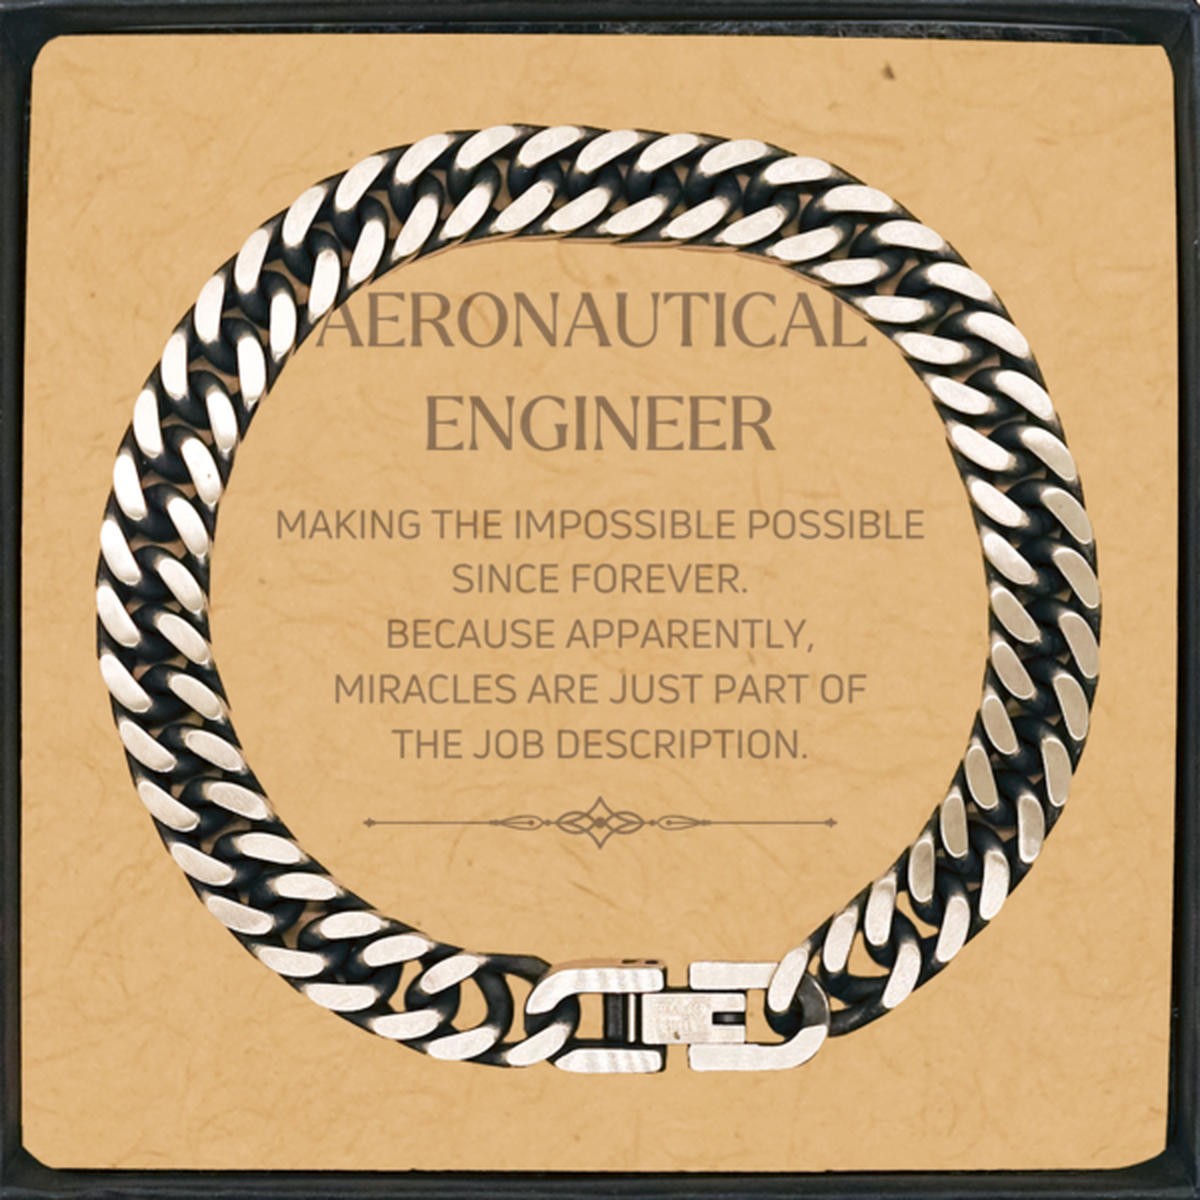 Funny Aeronautical Engineer Gifts, Miracles are just part of the job description, Inspirational Birthday Cuban Link Chain Bracelet For Aeronautical Engineer, Men, Women, Coworkers, Friends, Boss